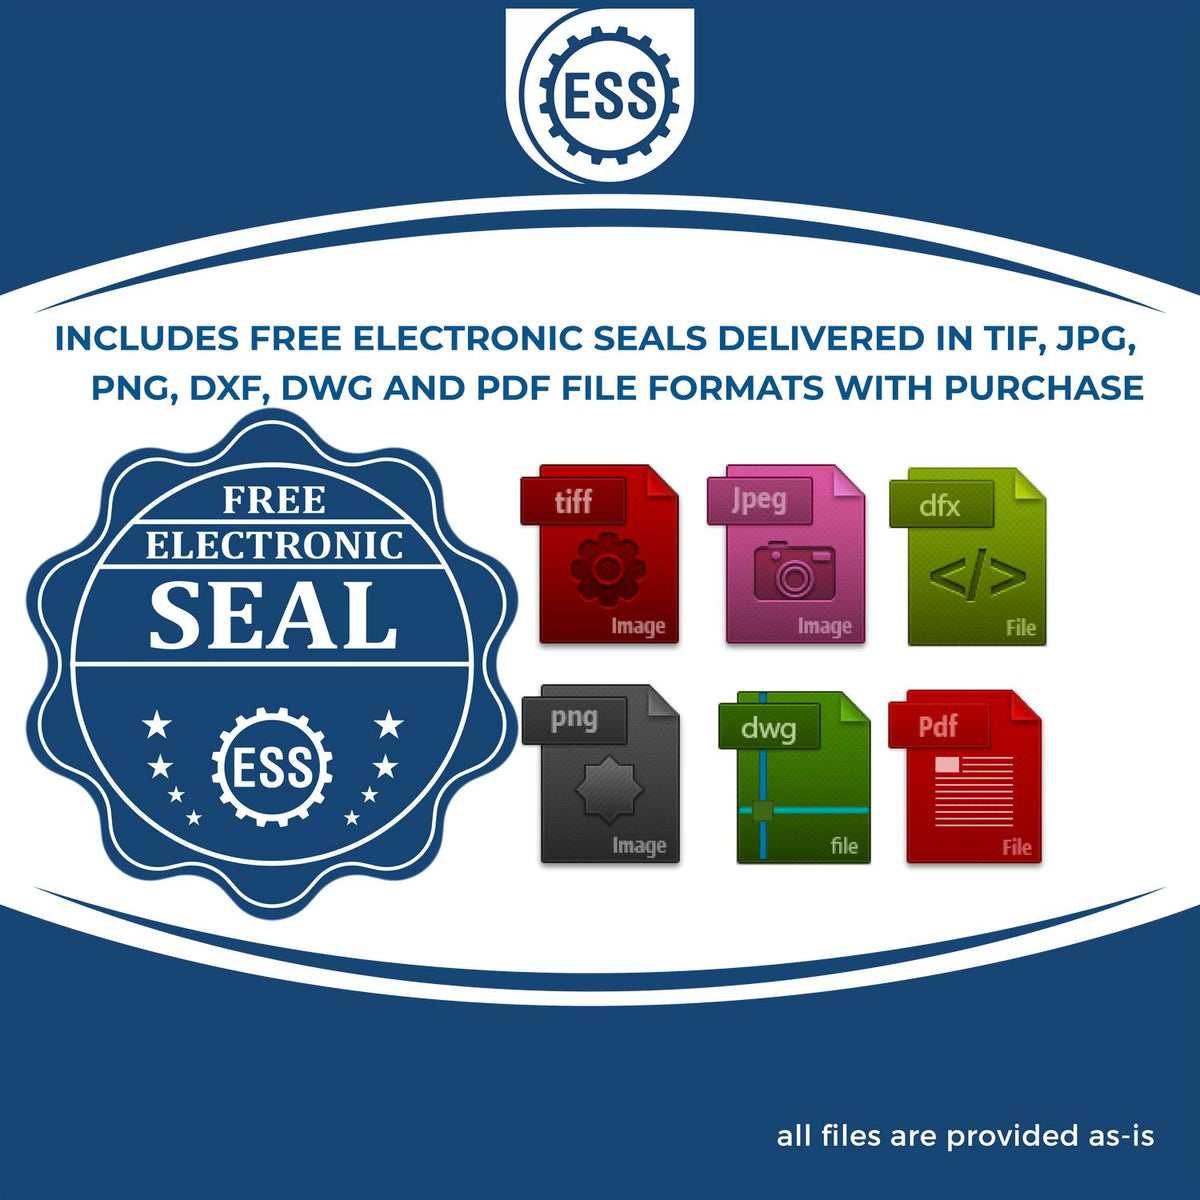 An infographic for the free electronic seal for the Virginia Professional Geologist Seal Stamp illustrating the different file type icons such as DXF, DWG, TIF, JPG and PNG.